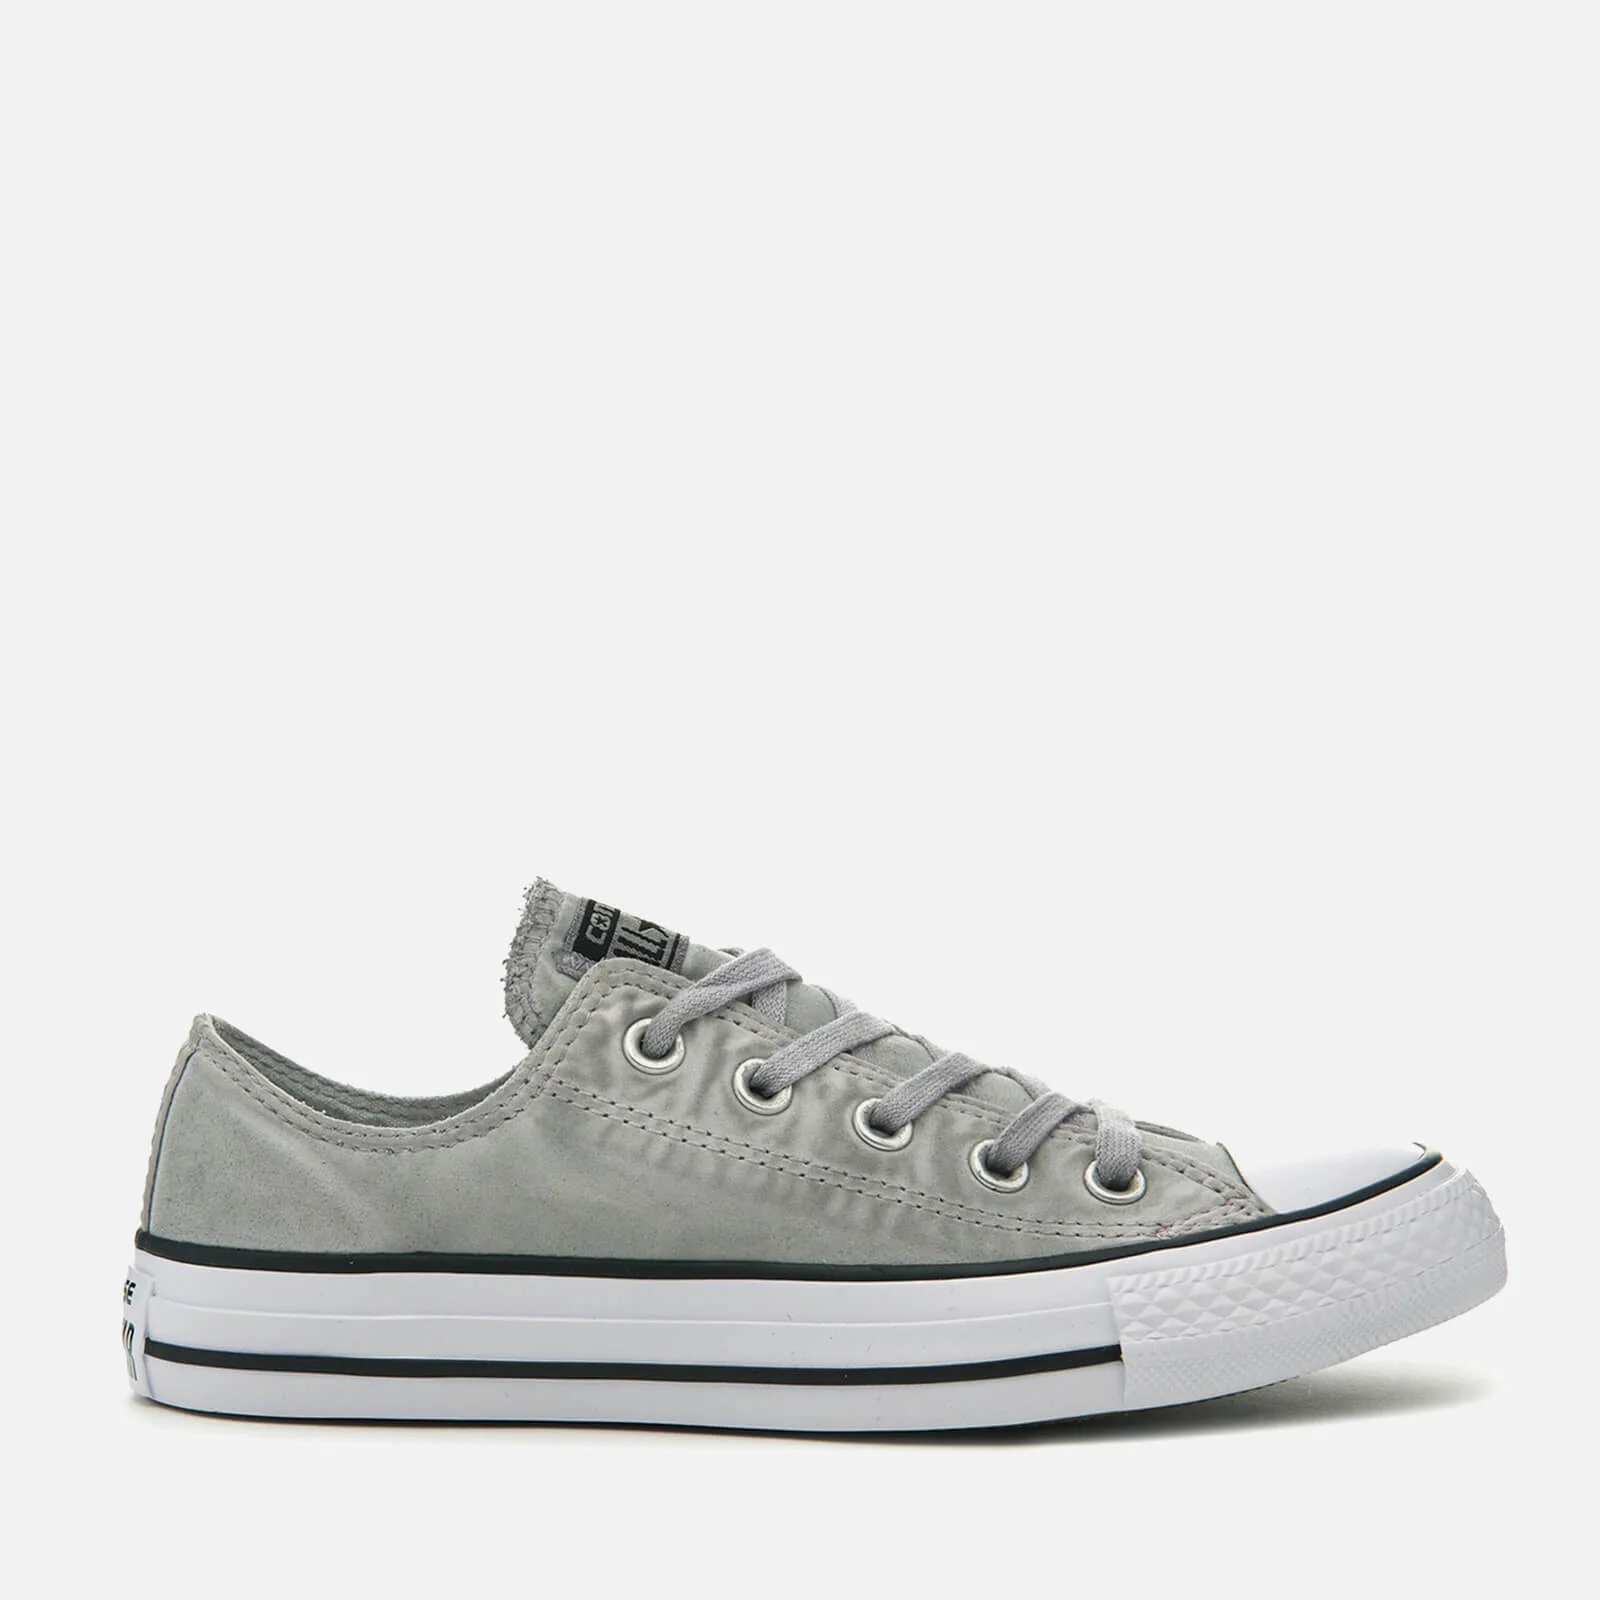 Converse Chuck Taylor All Star Ox Trainers - Dolphin/Black/White Image 1